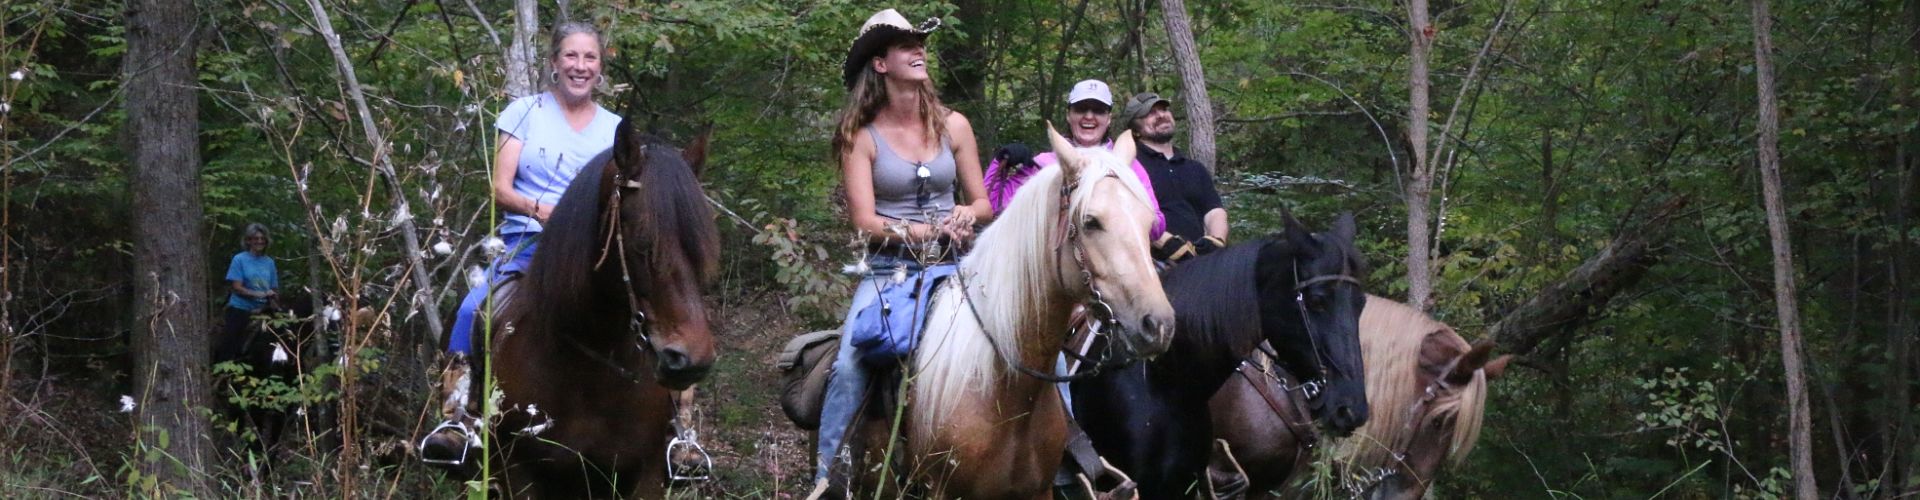 Guests trail riidng and having a great time on horseback